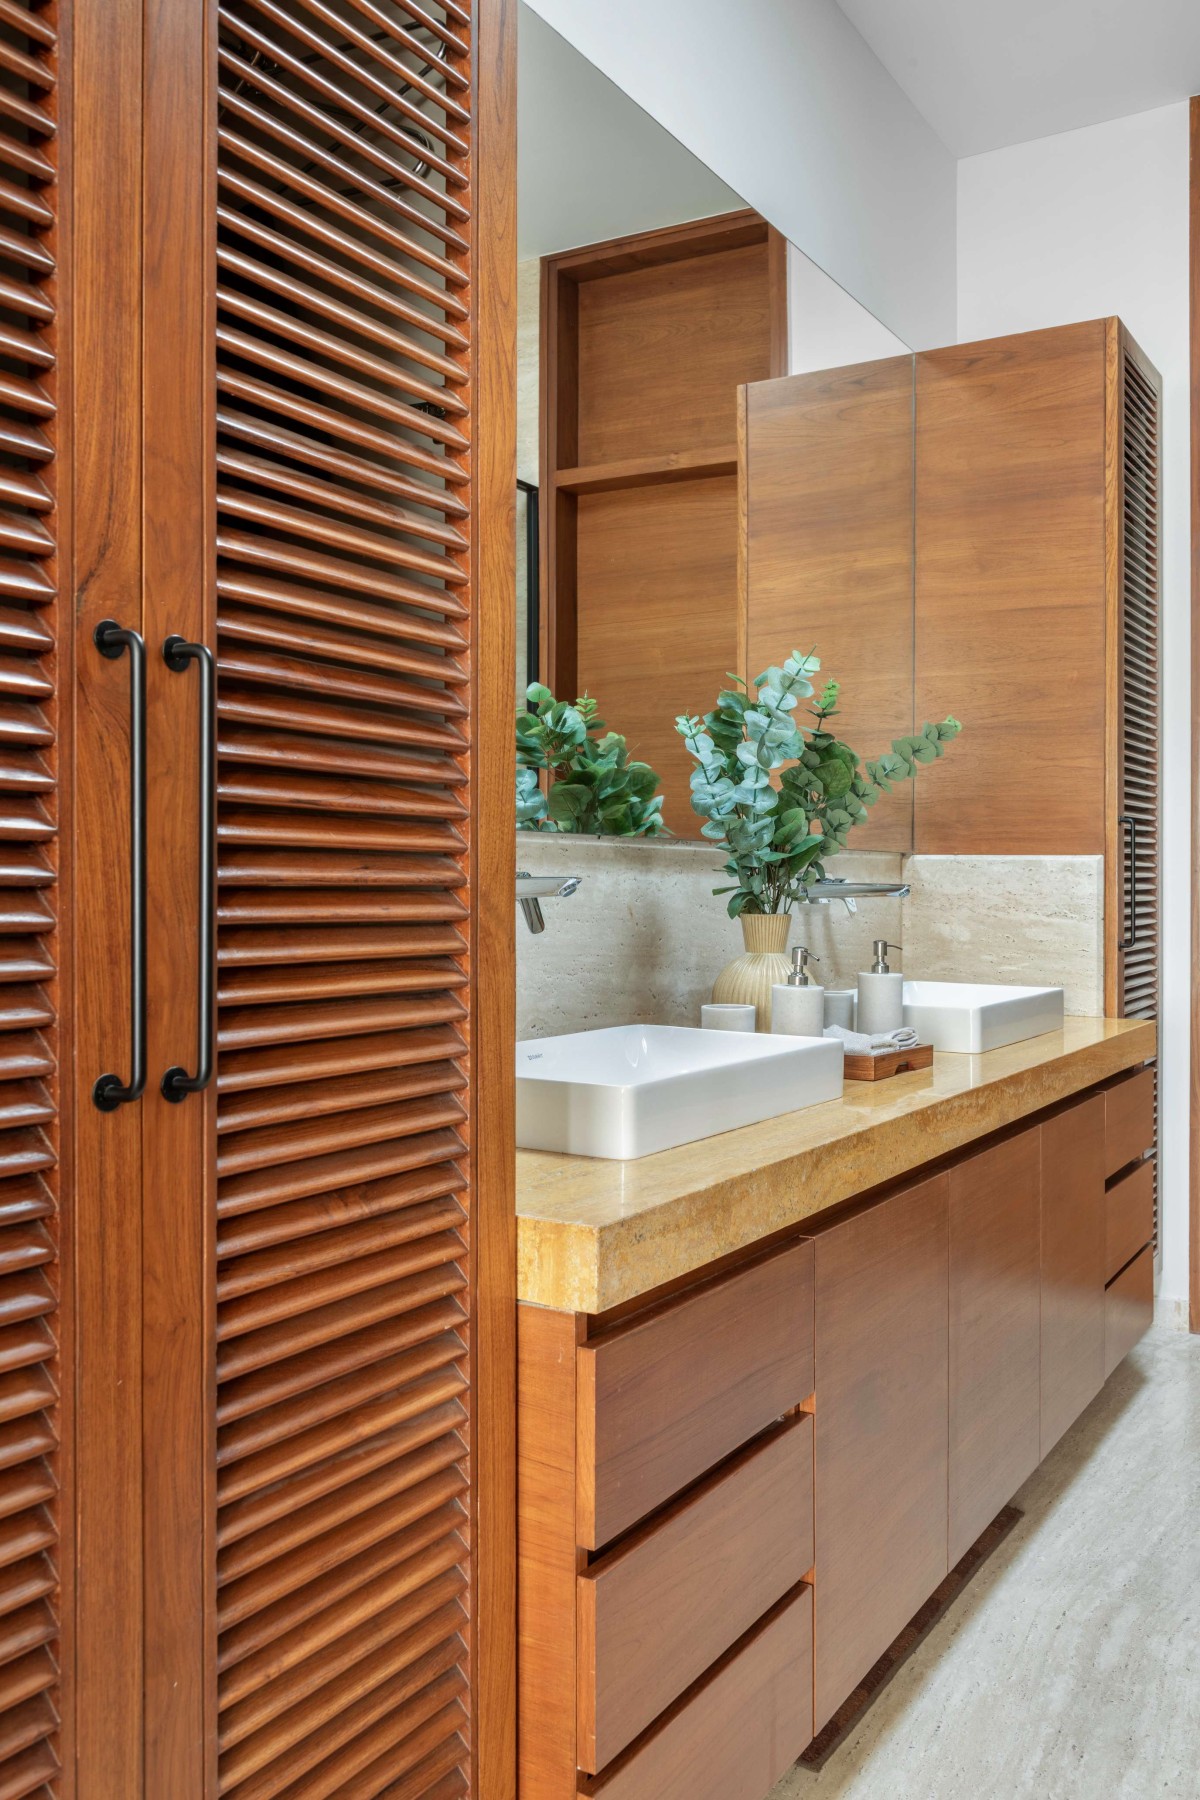 Master bathroom of Hovering House of Parikhs by Anarr Gunjaria Interiors and Modo Design